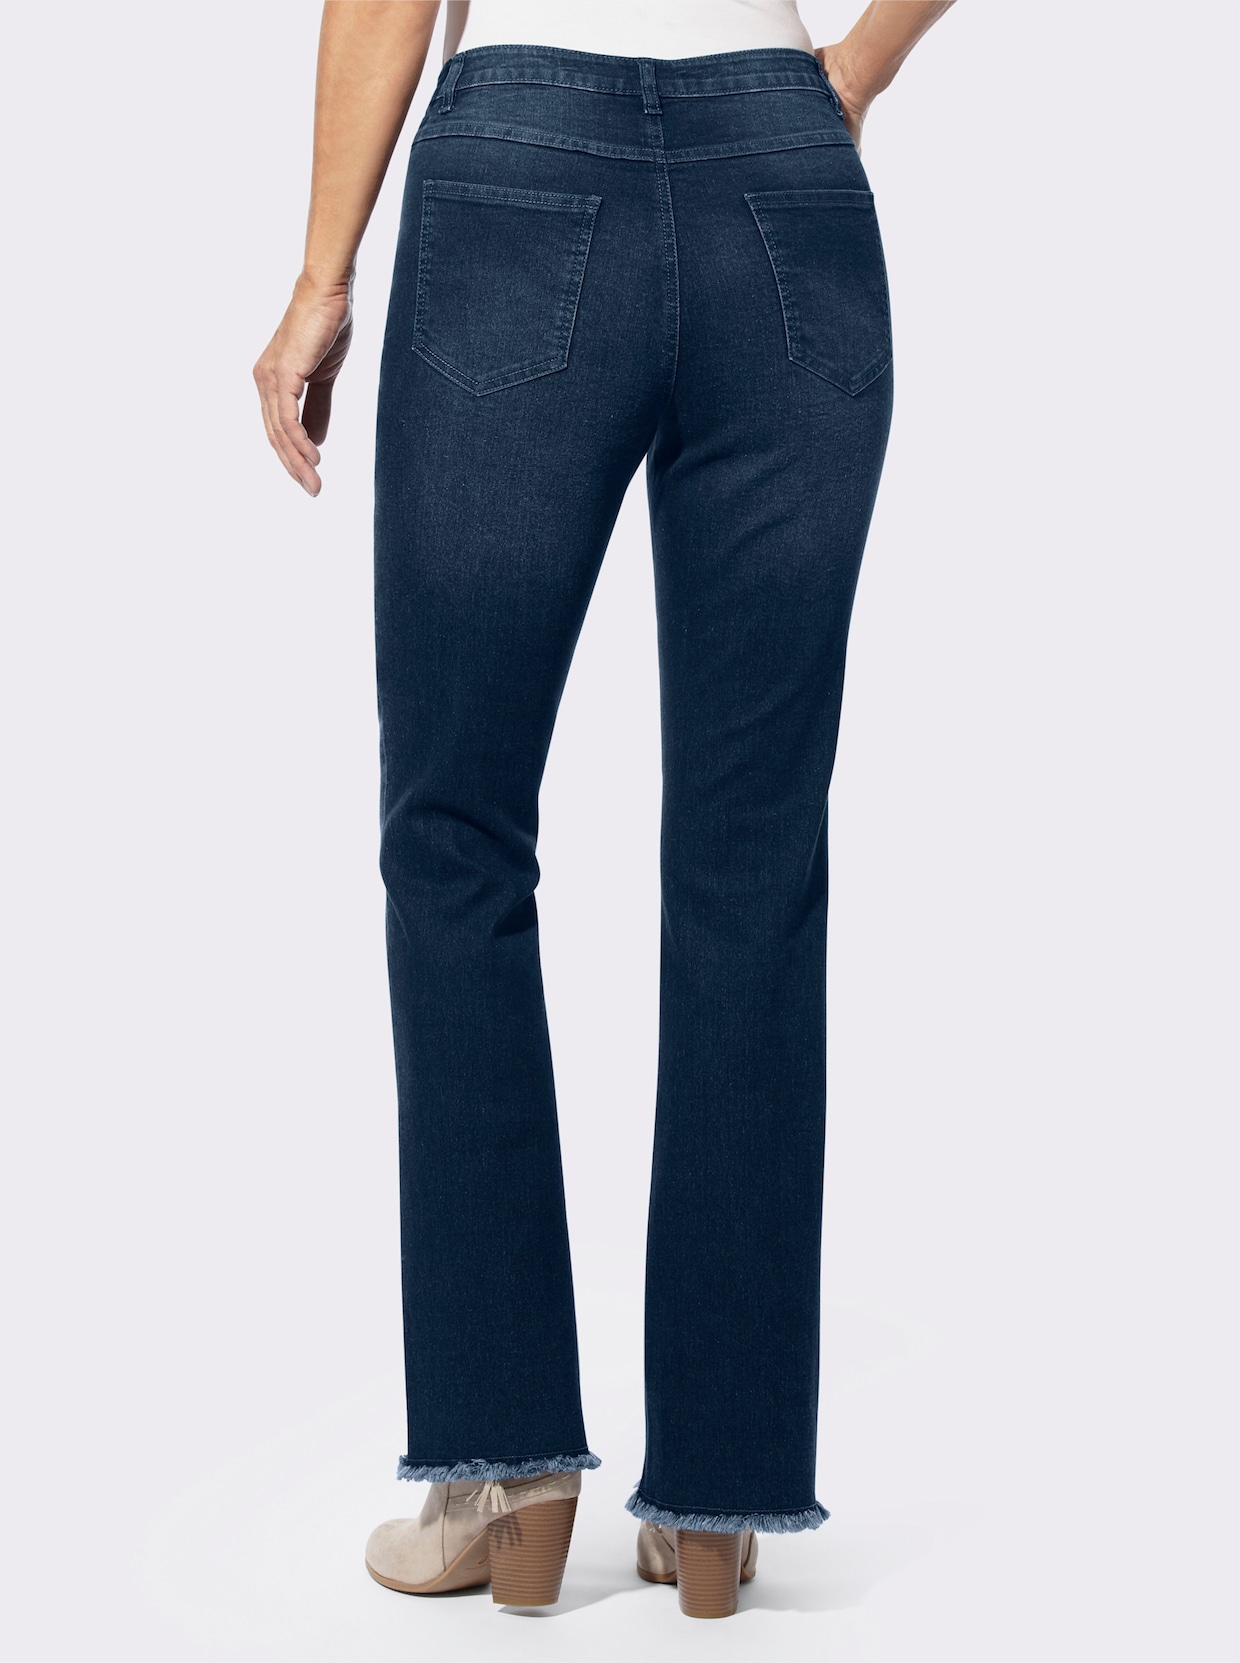 Bootcutjeans - blue-stone-washed